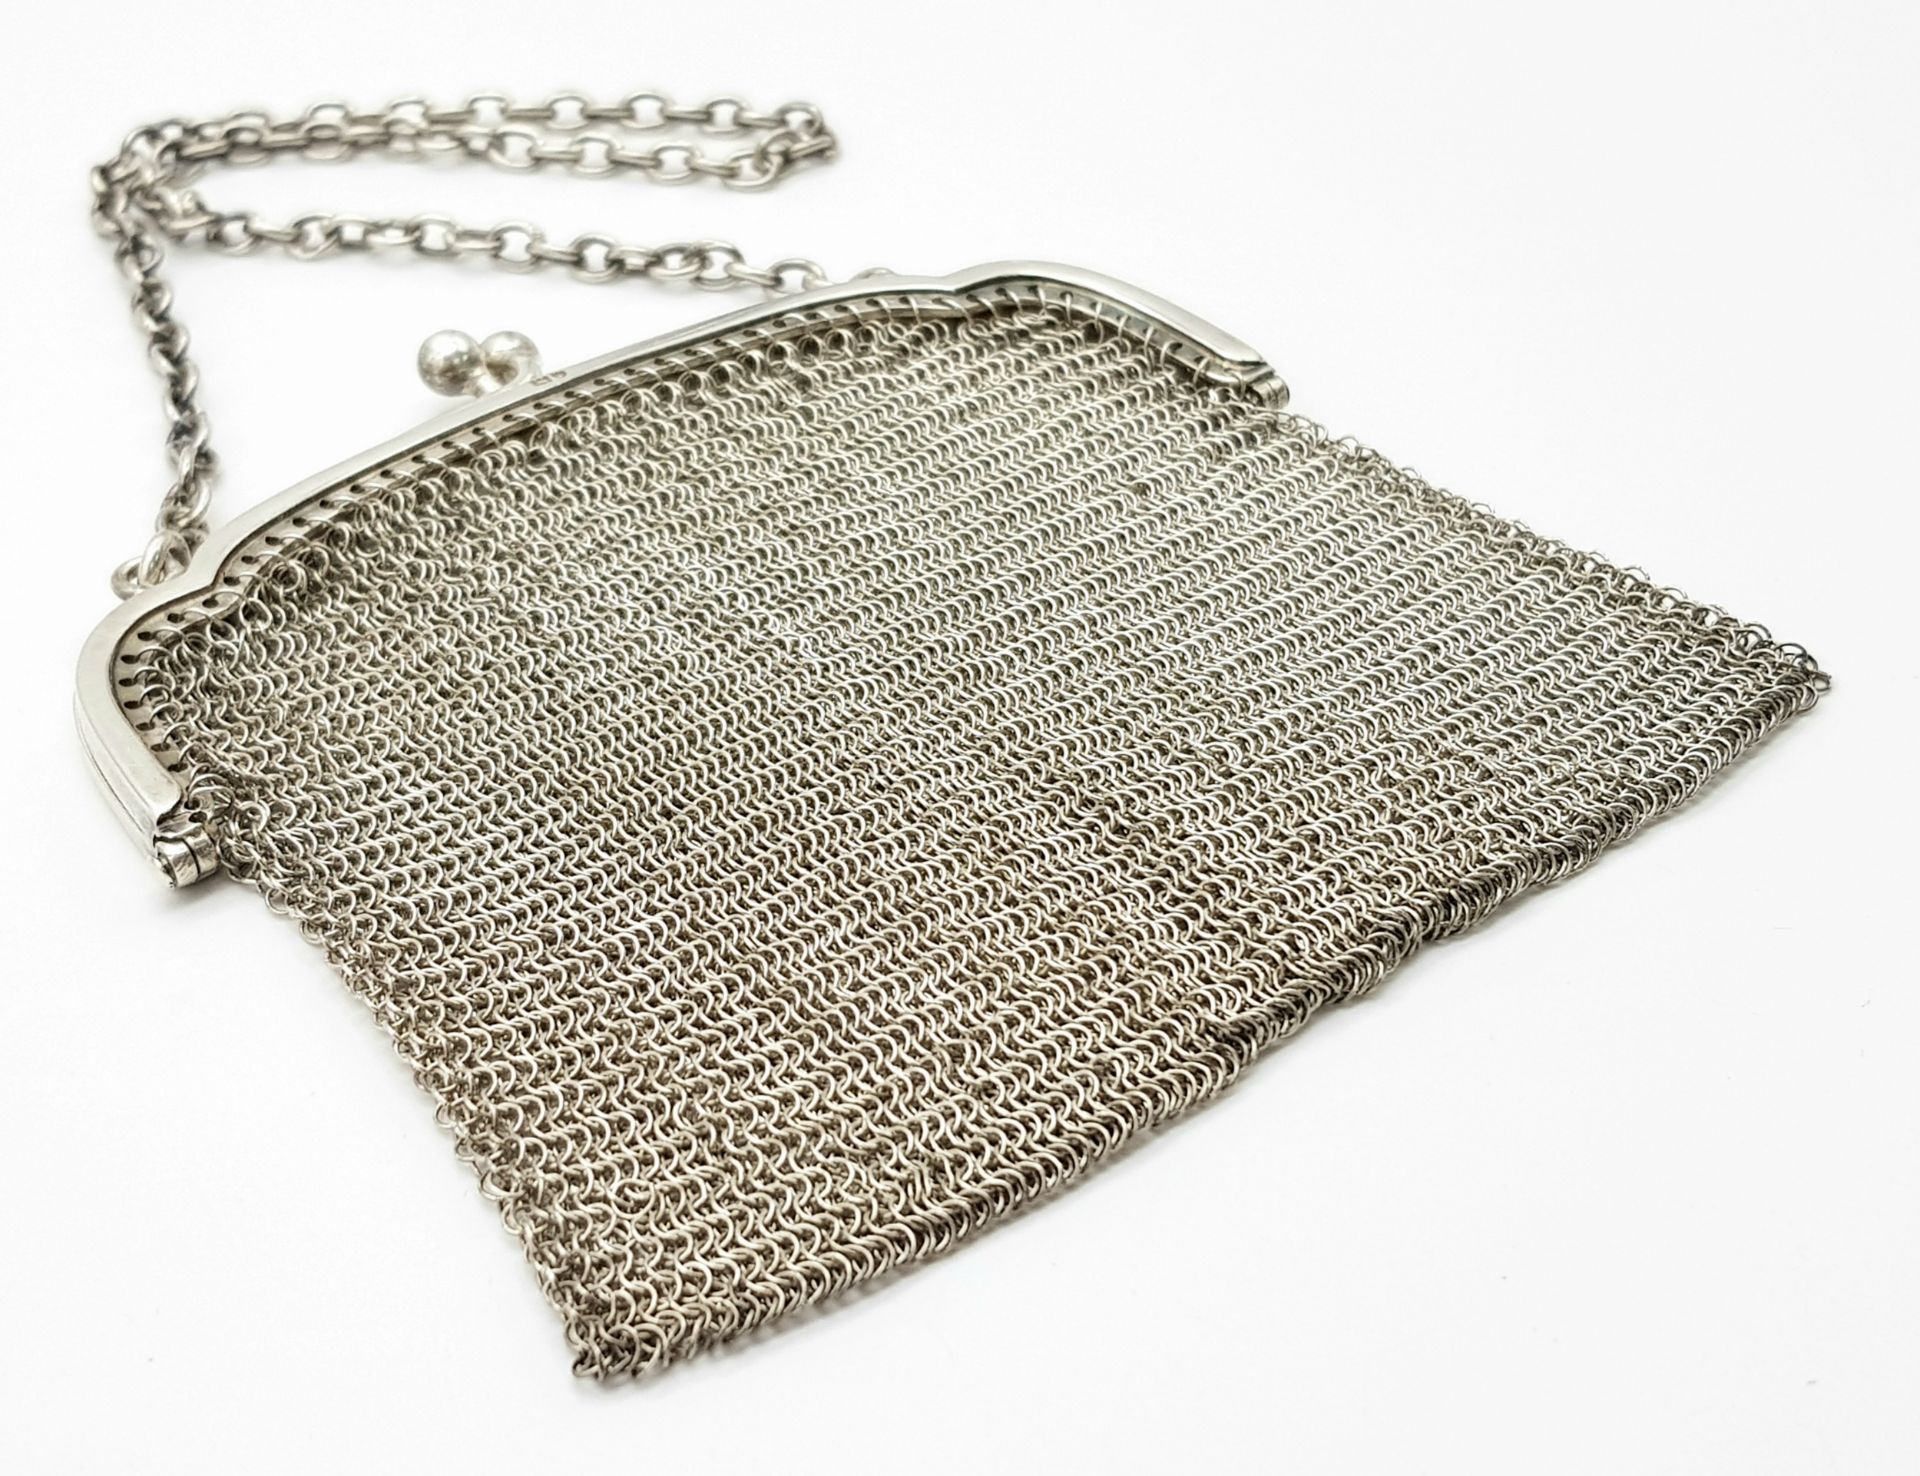 An Antique Silver Chain Link Purse. Hallmarks for London, 1915. 12cm length x 9cm height. 91g - Image 5 of 5